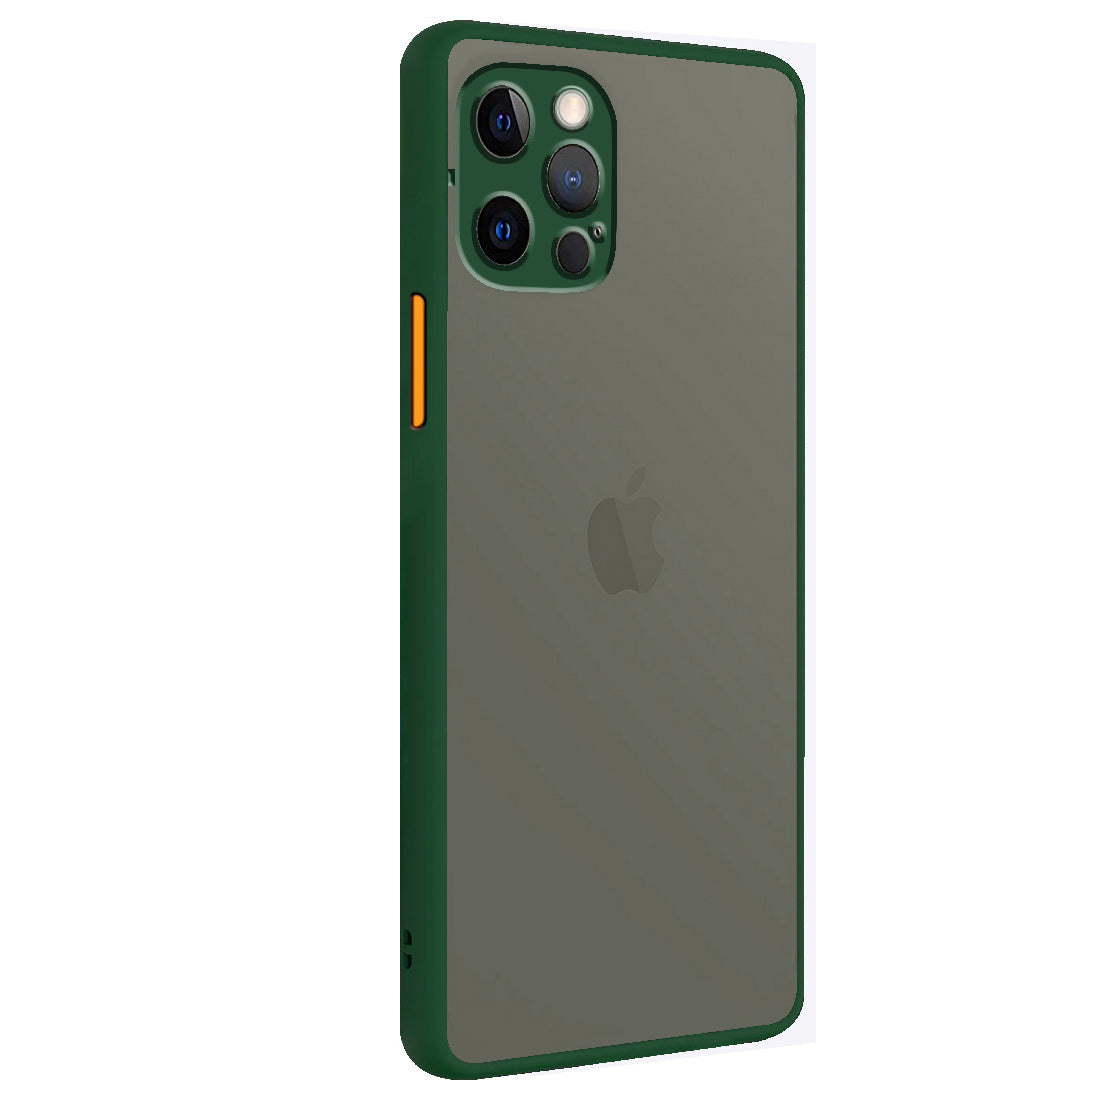 Smoke Back Case Cover for Apple iPhone 12 Pro